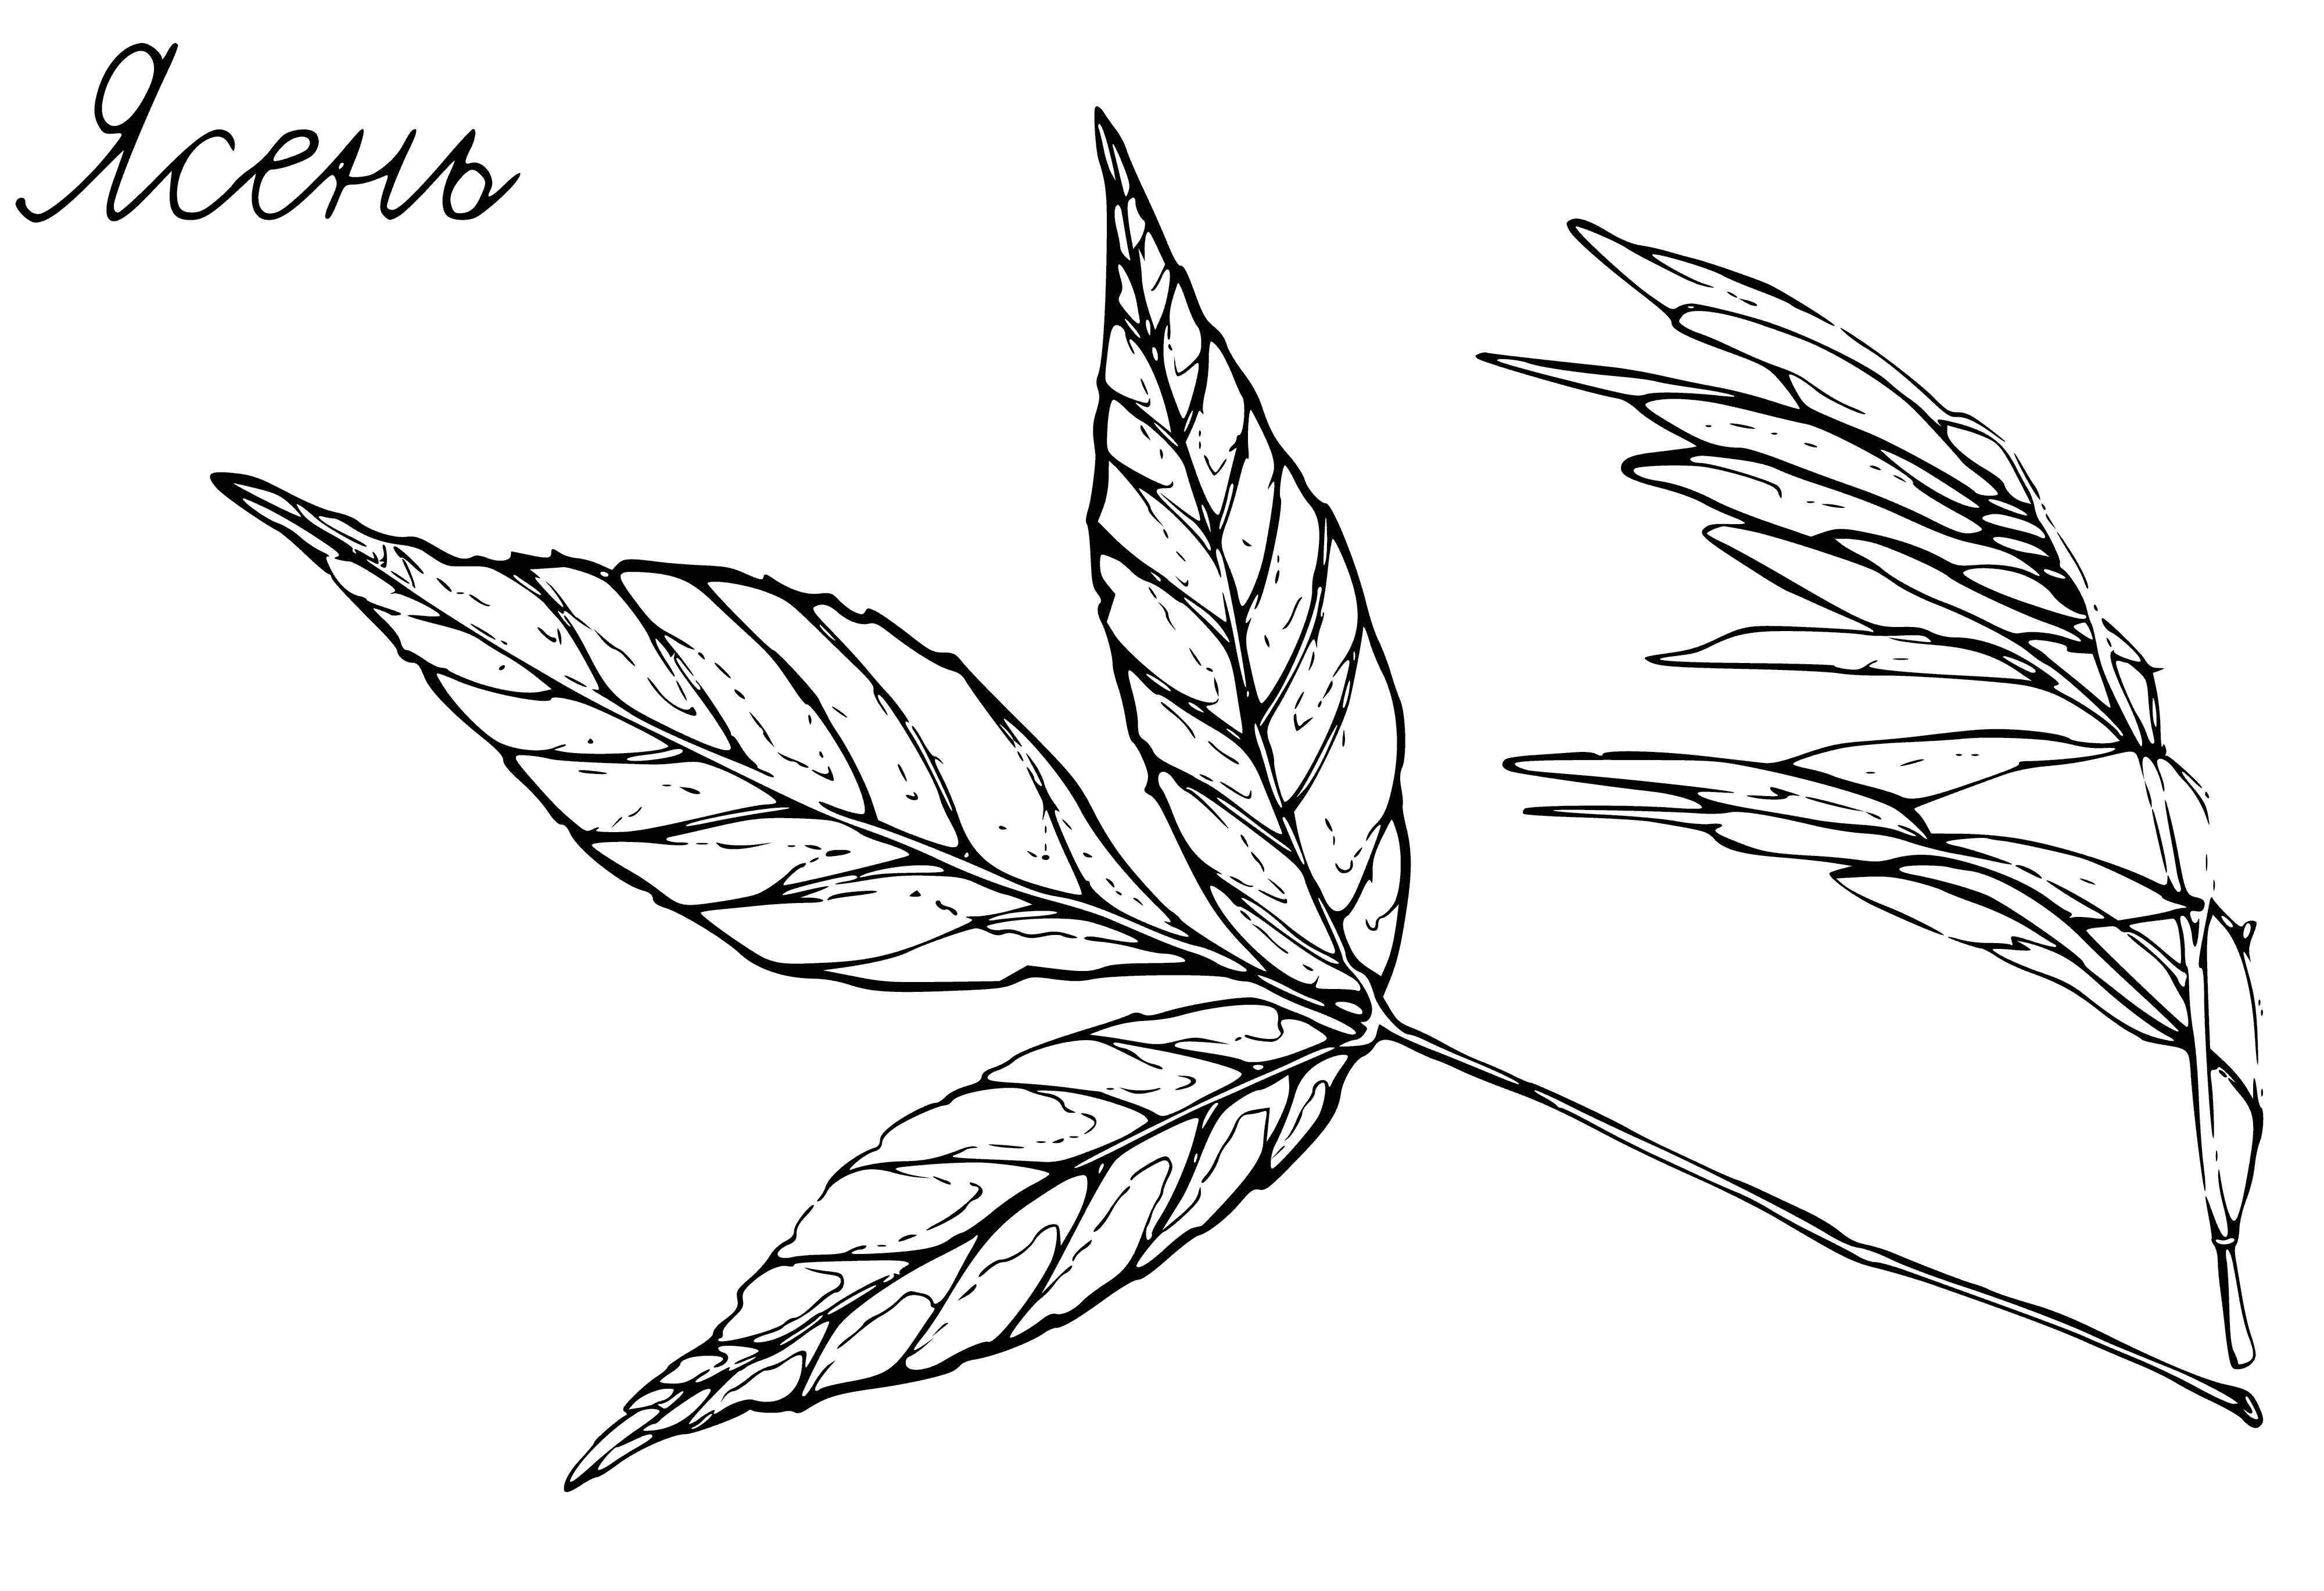 coloring page: Coloring page of ash leaf with teardrop-shaped seed & light brown papery wing attached.